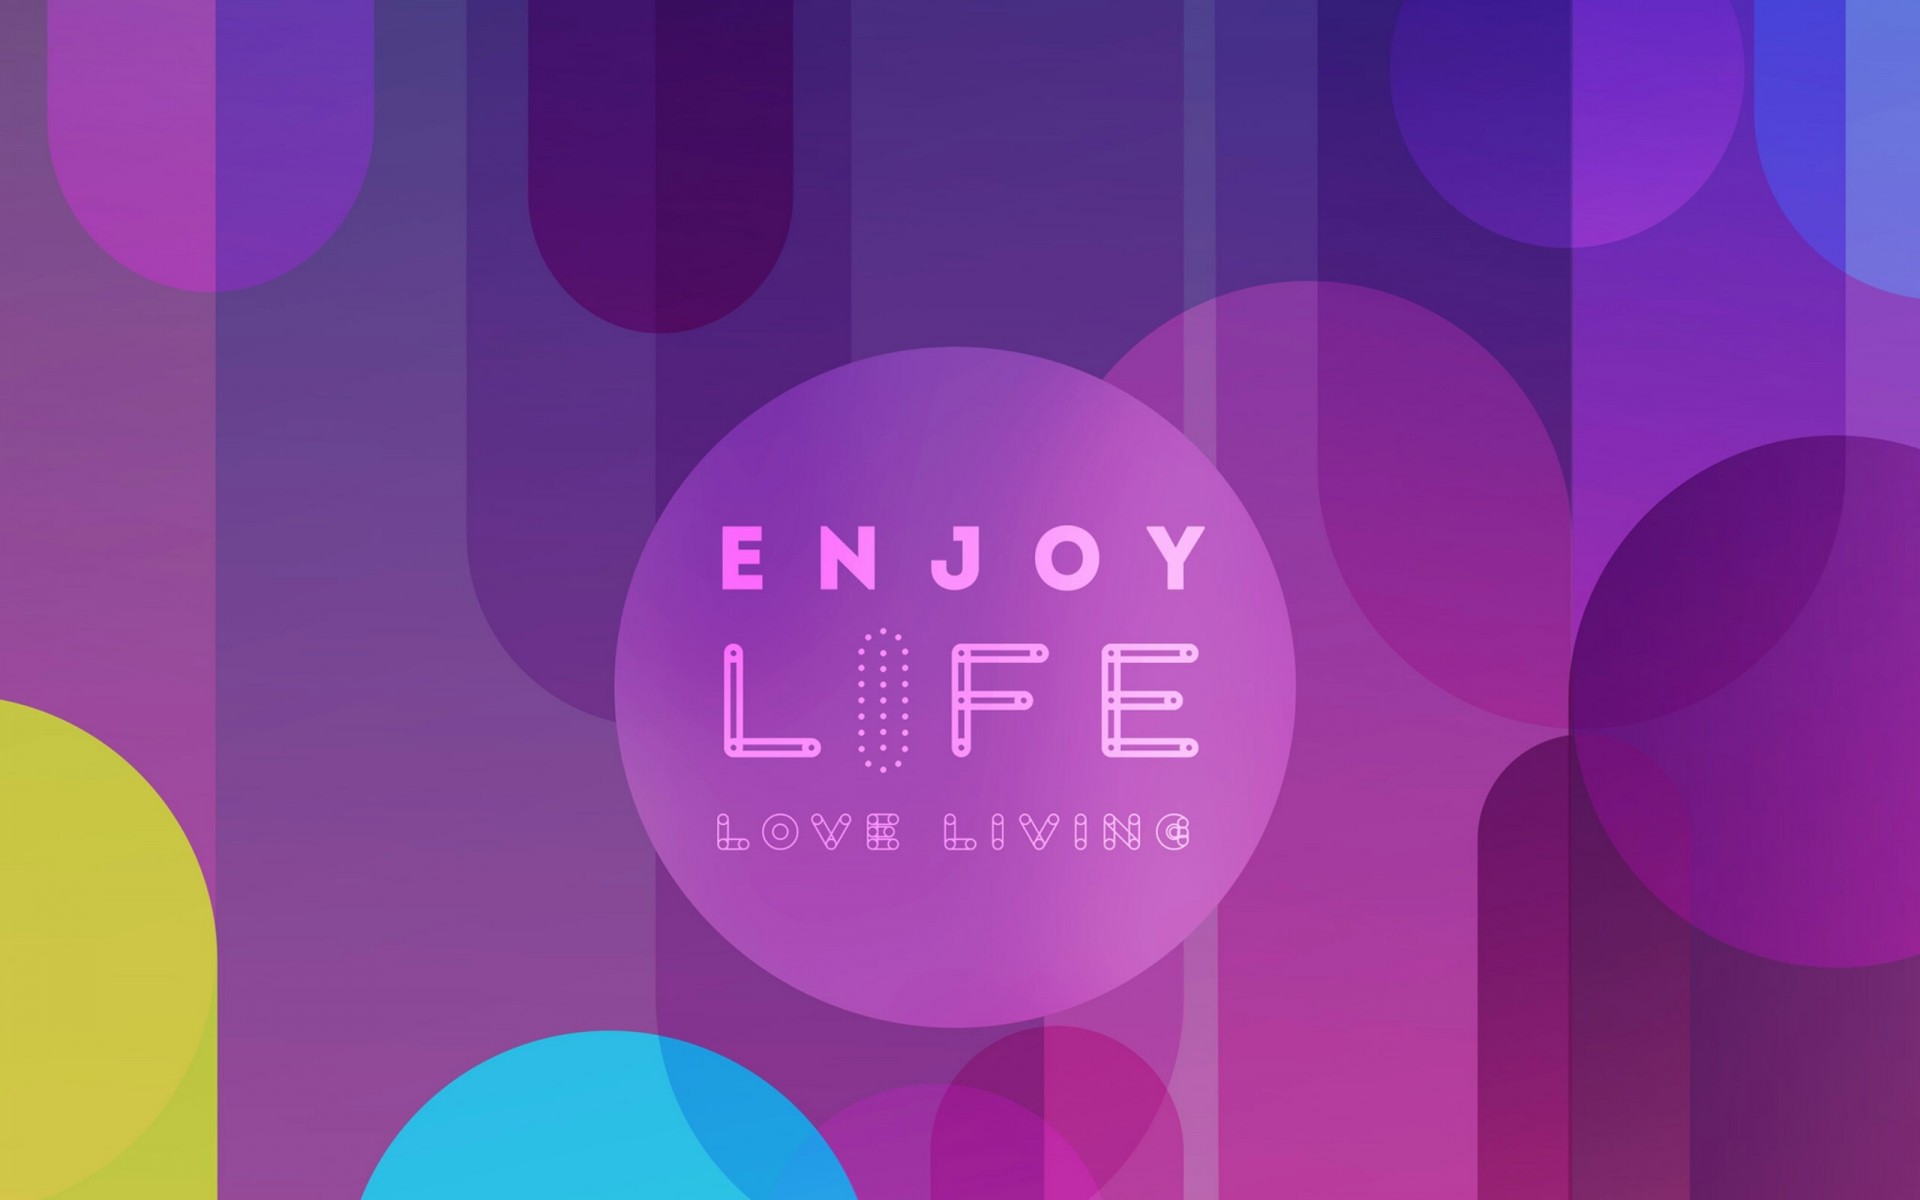 Enjoy Life Love Living Quotes Wallpaper for Desktop and Mobiles